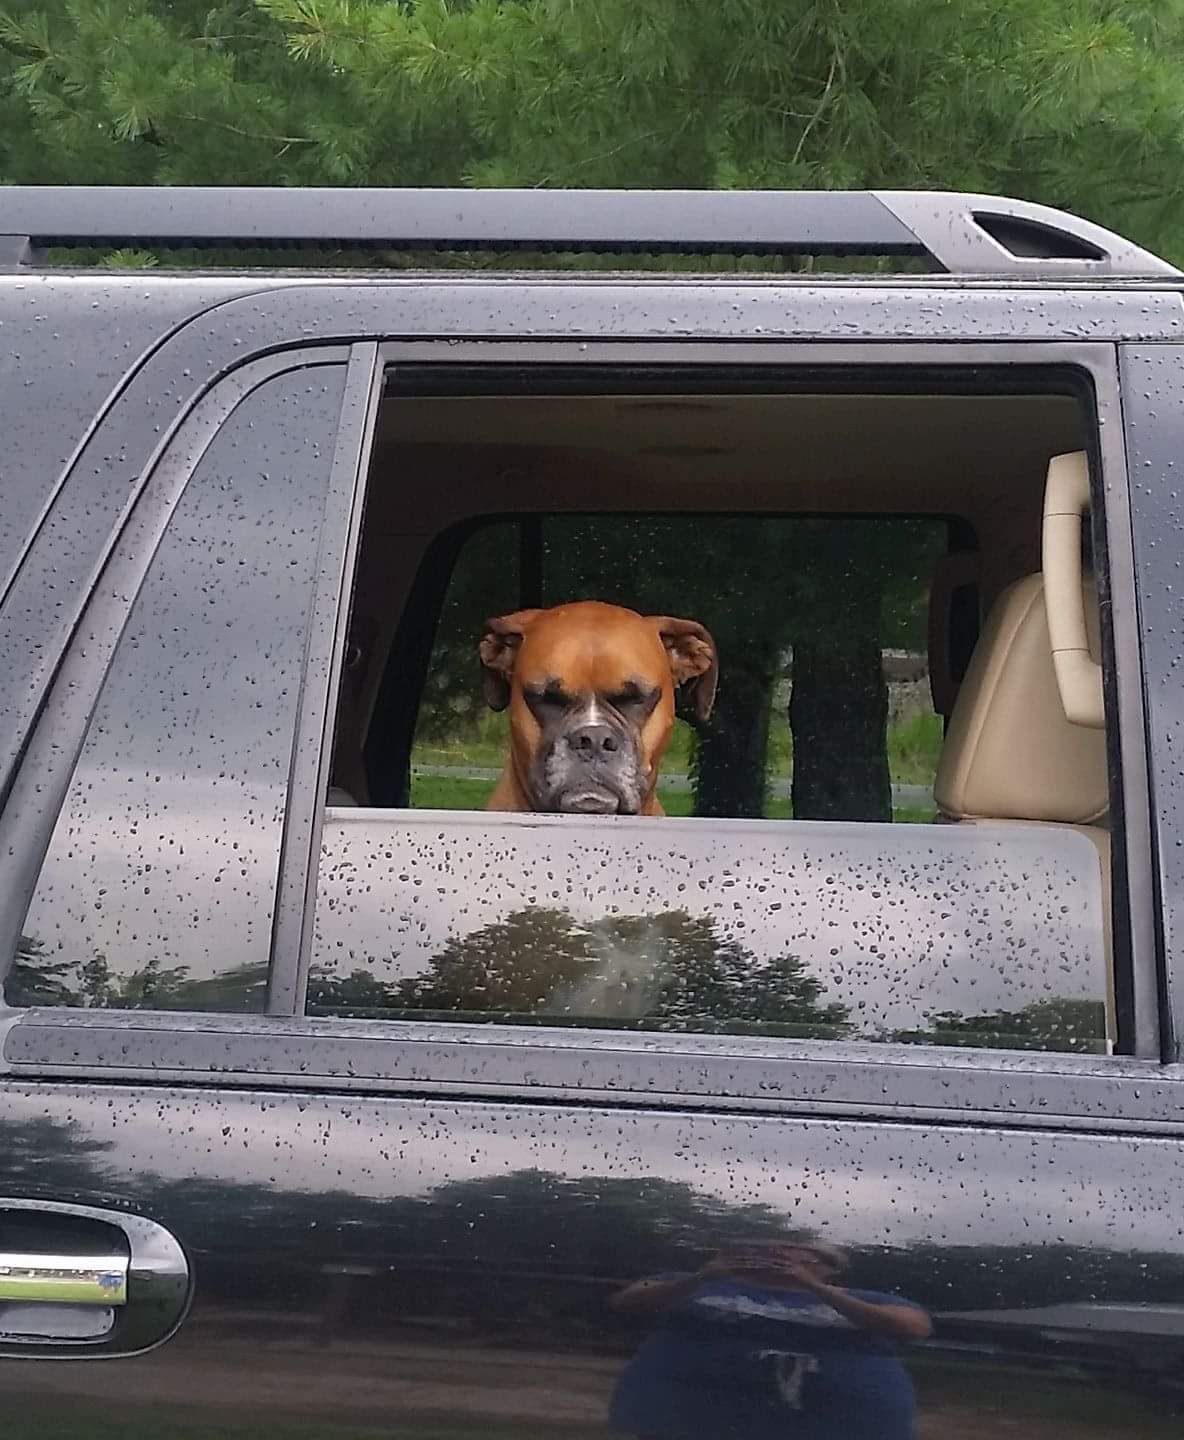 My friends dog is not happy about leaving the dog park early!